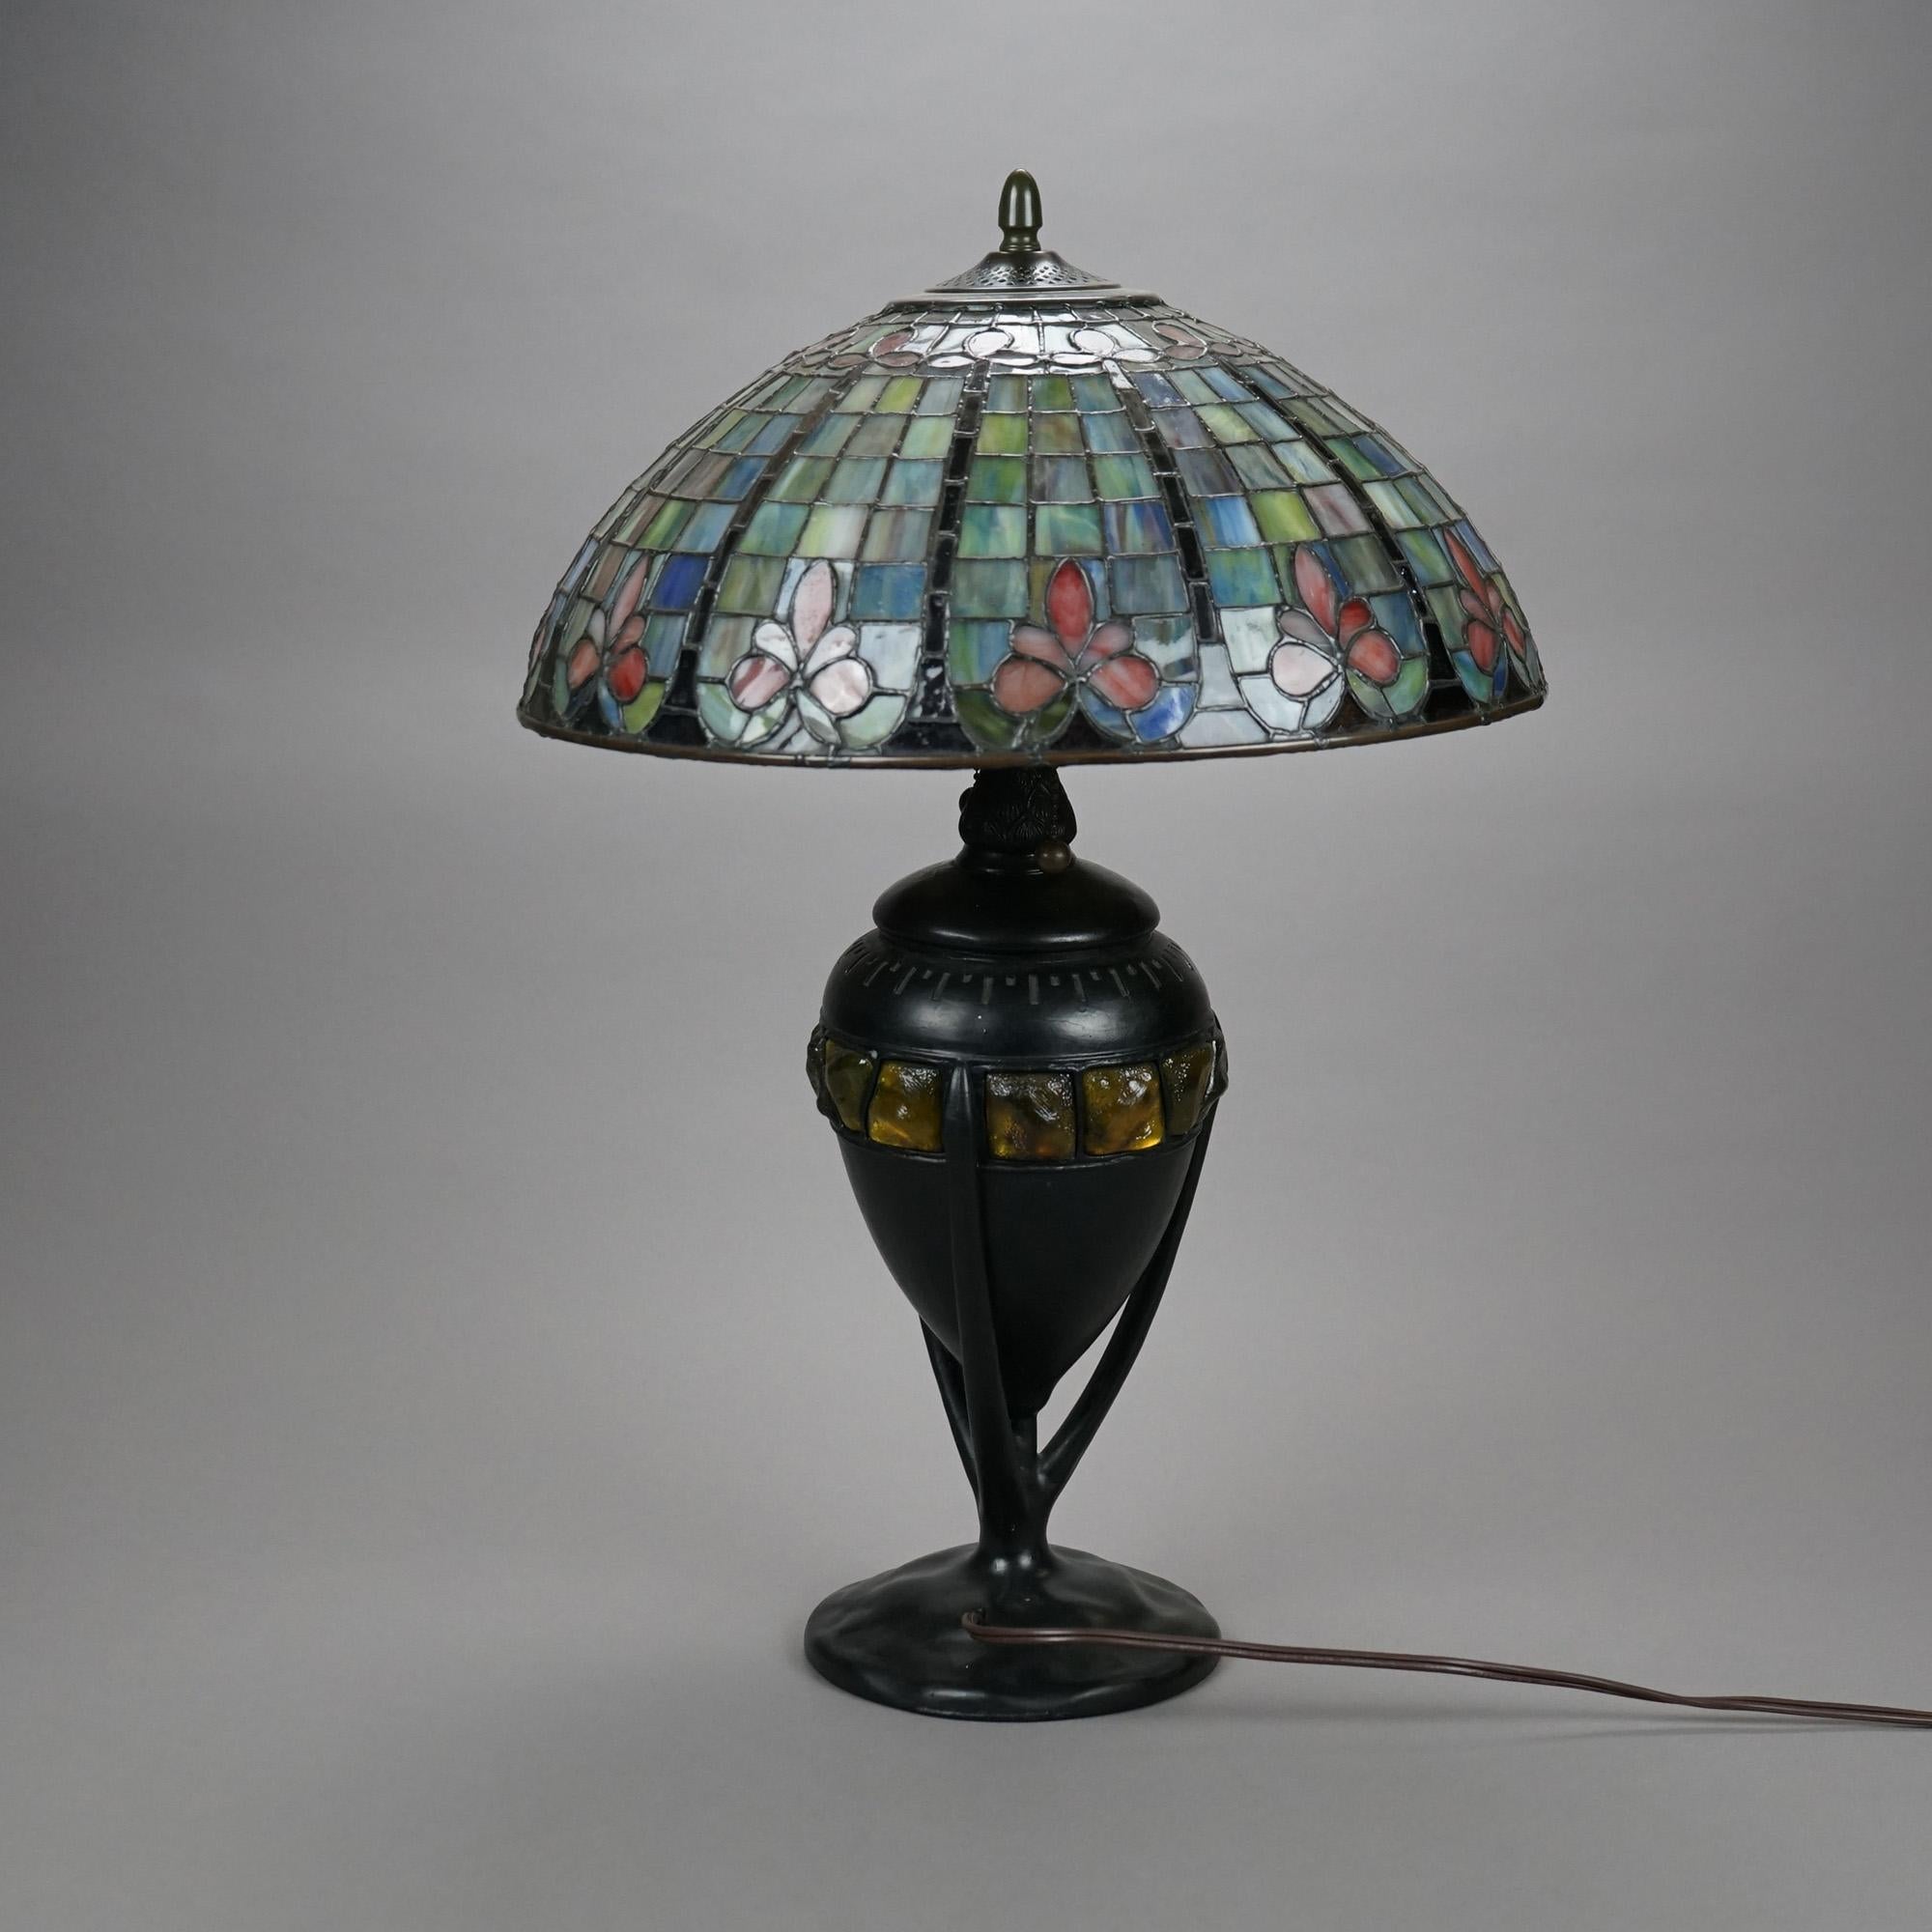 An Arts and Crafts table lamp offers domed leaded glass shade having stylized floral elements over cast urn form double socket base have jeweled art glass inserts, 20th century

Measures- 24.5'' H x 17.25'' W x 17.25'' D.